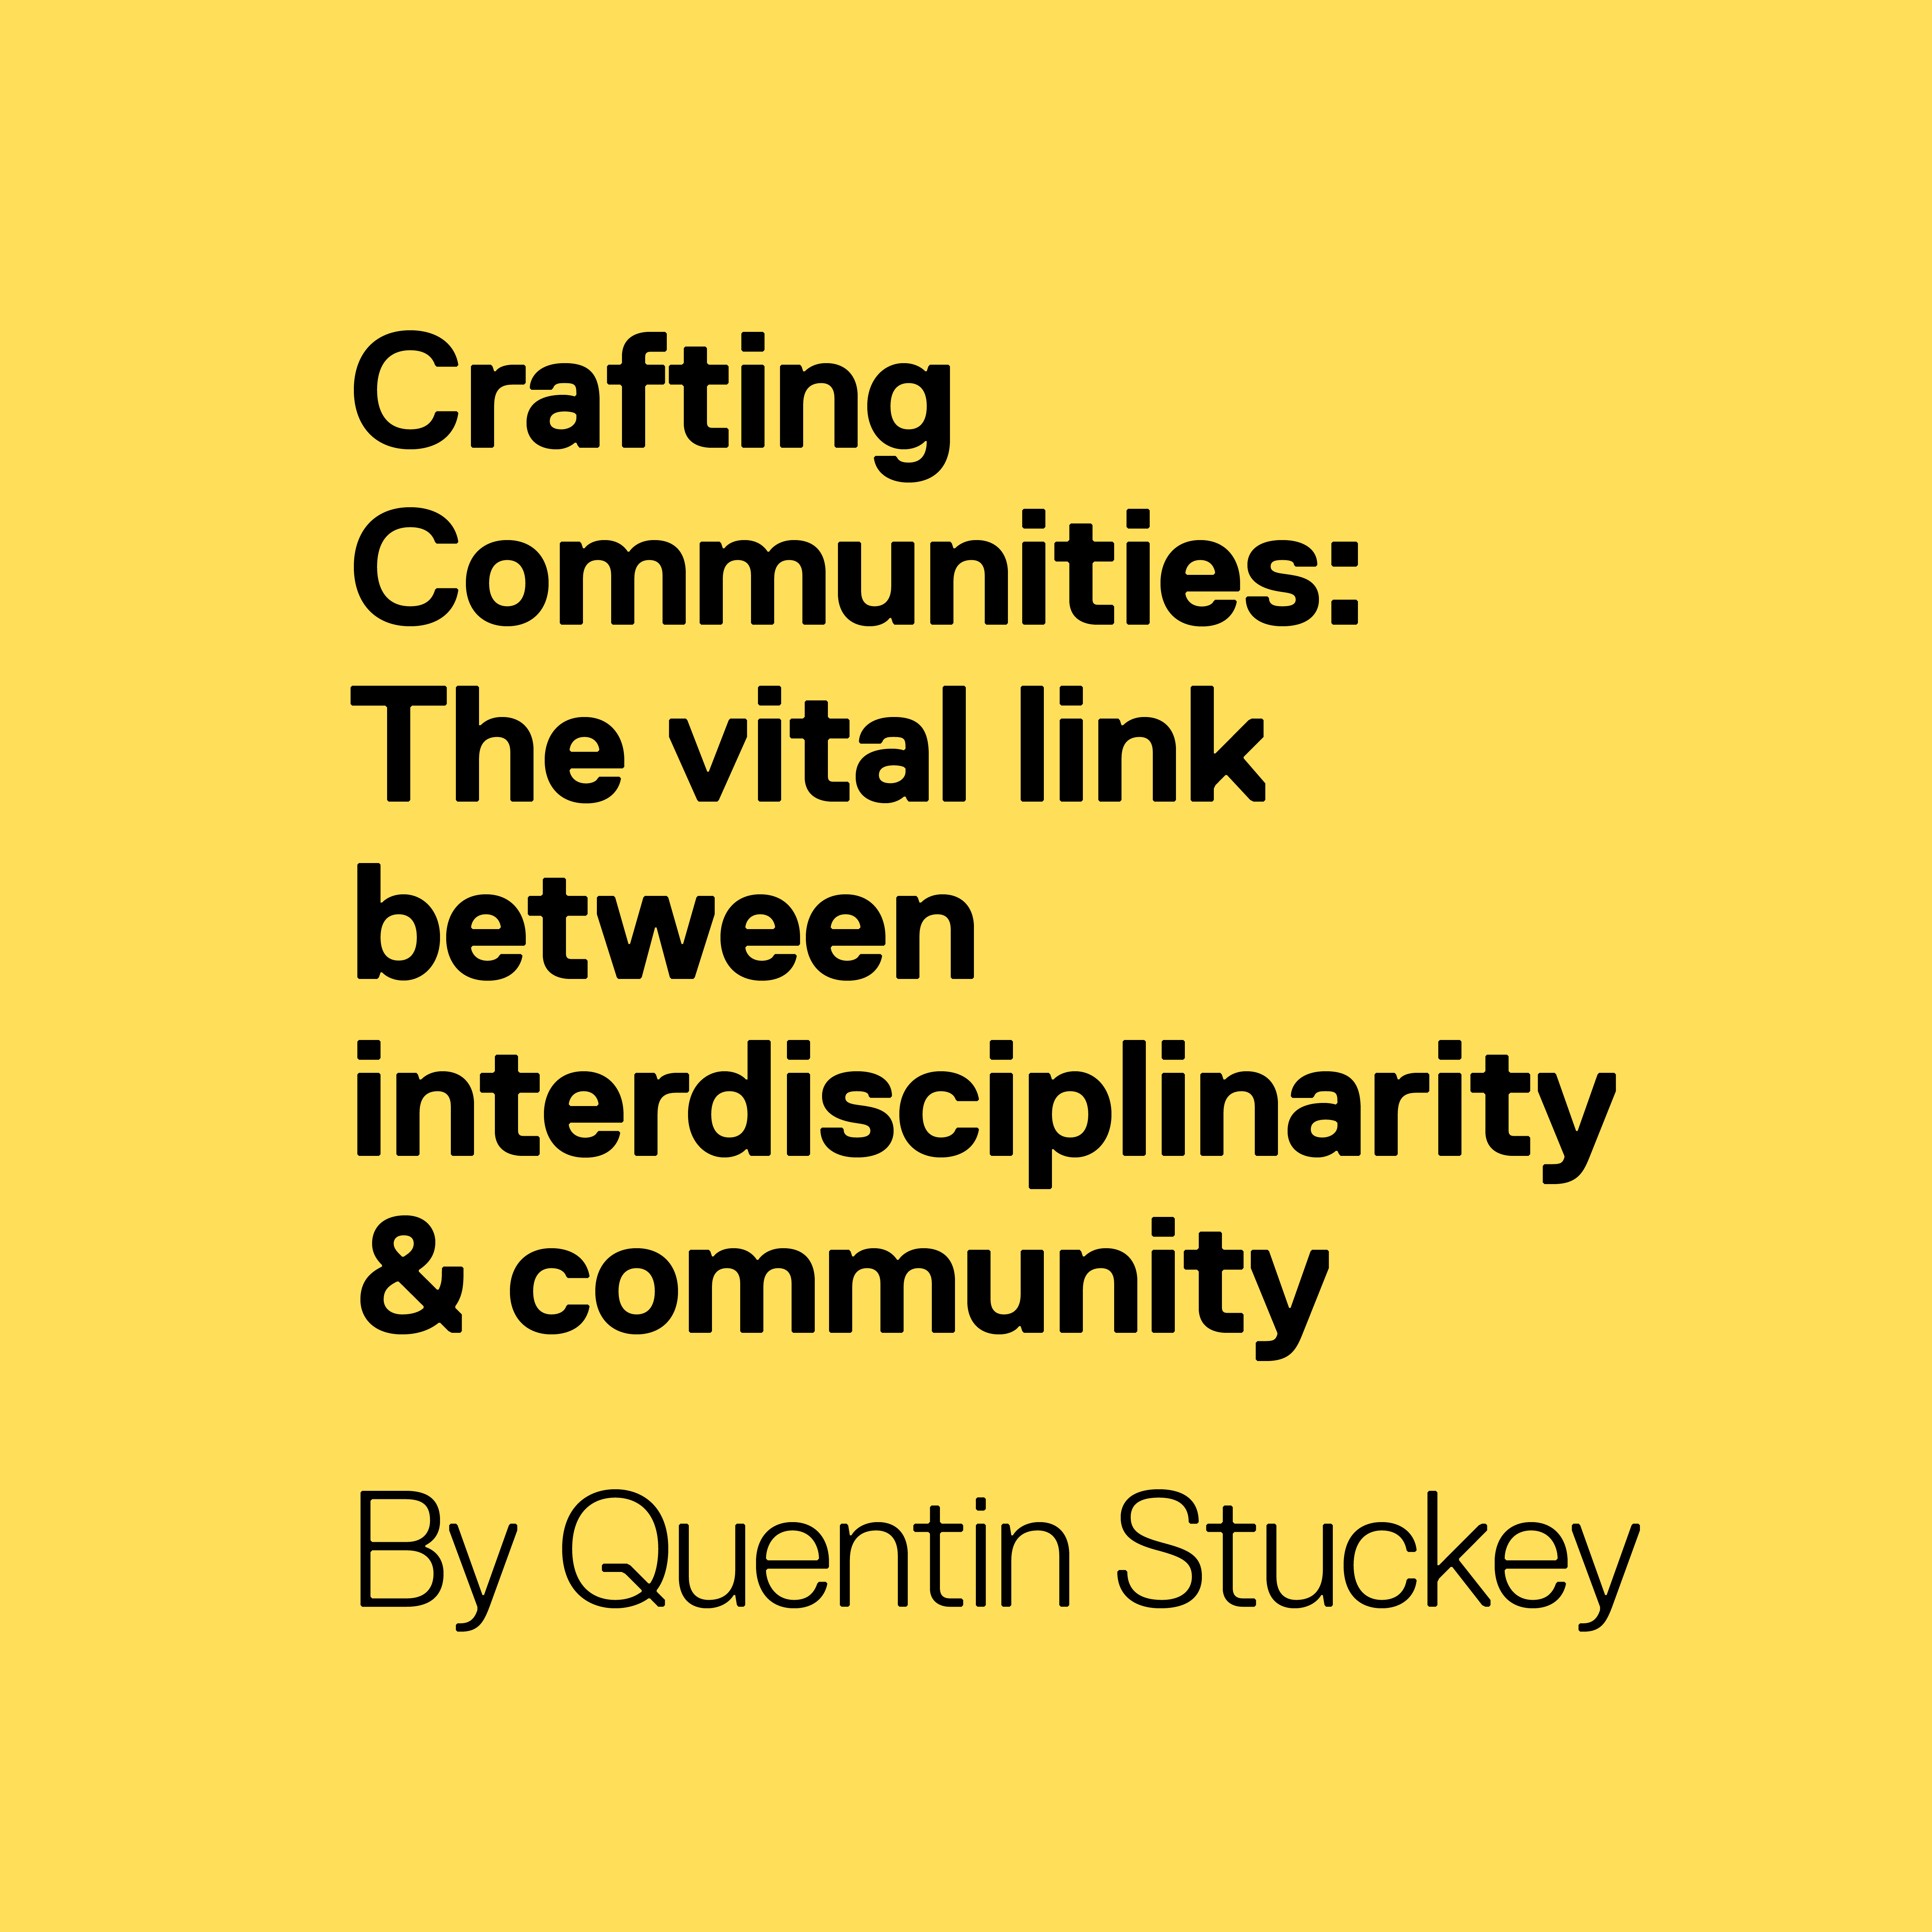 Crafting Communities: The vital link between interdisciplinarity and community. By Quentin Stuckey.